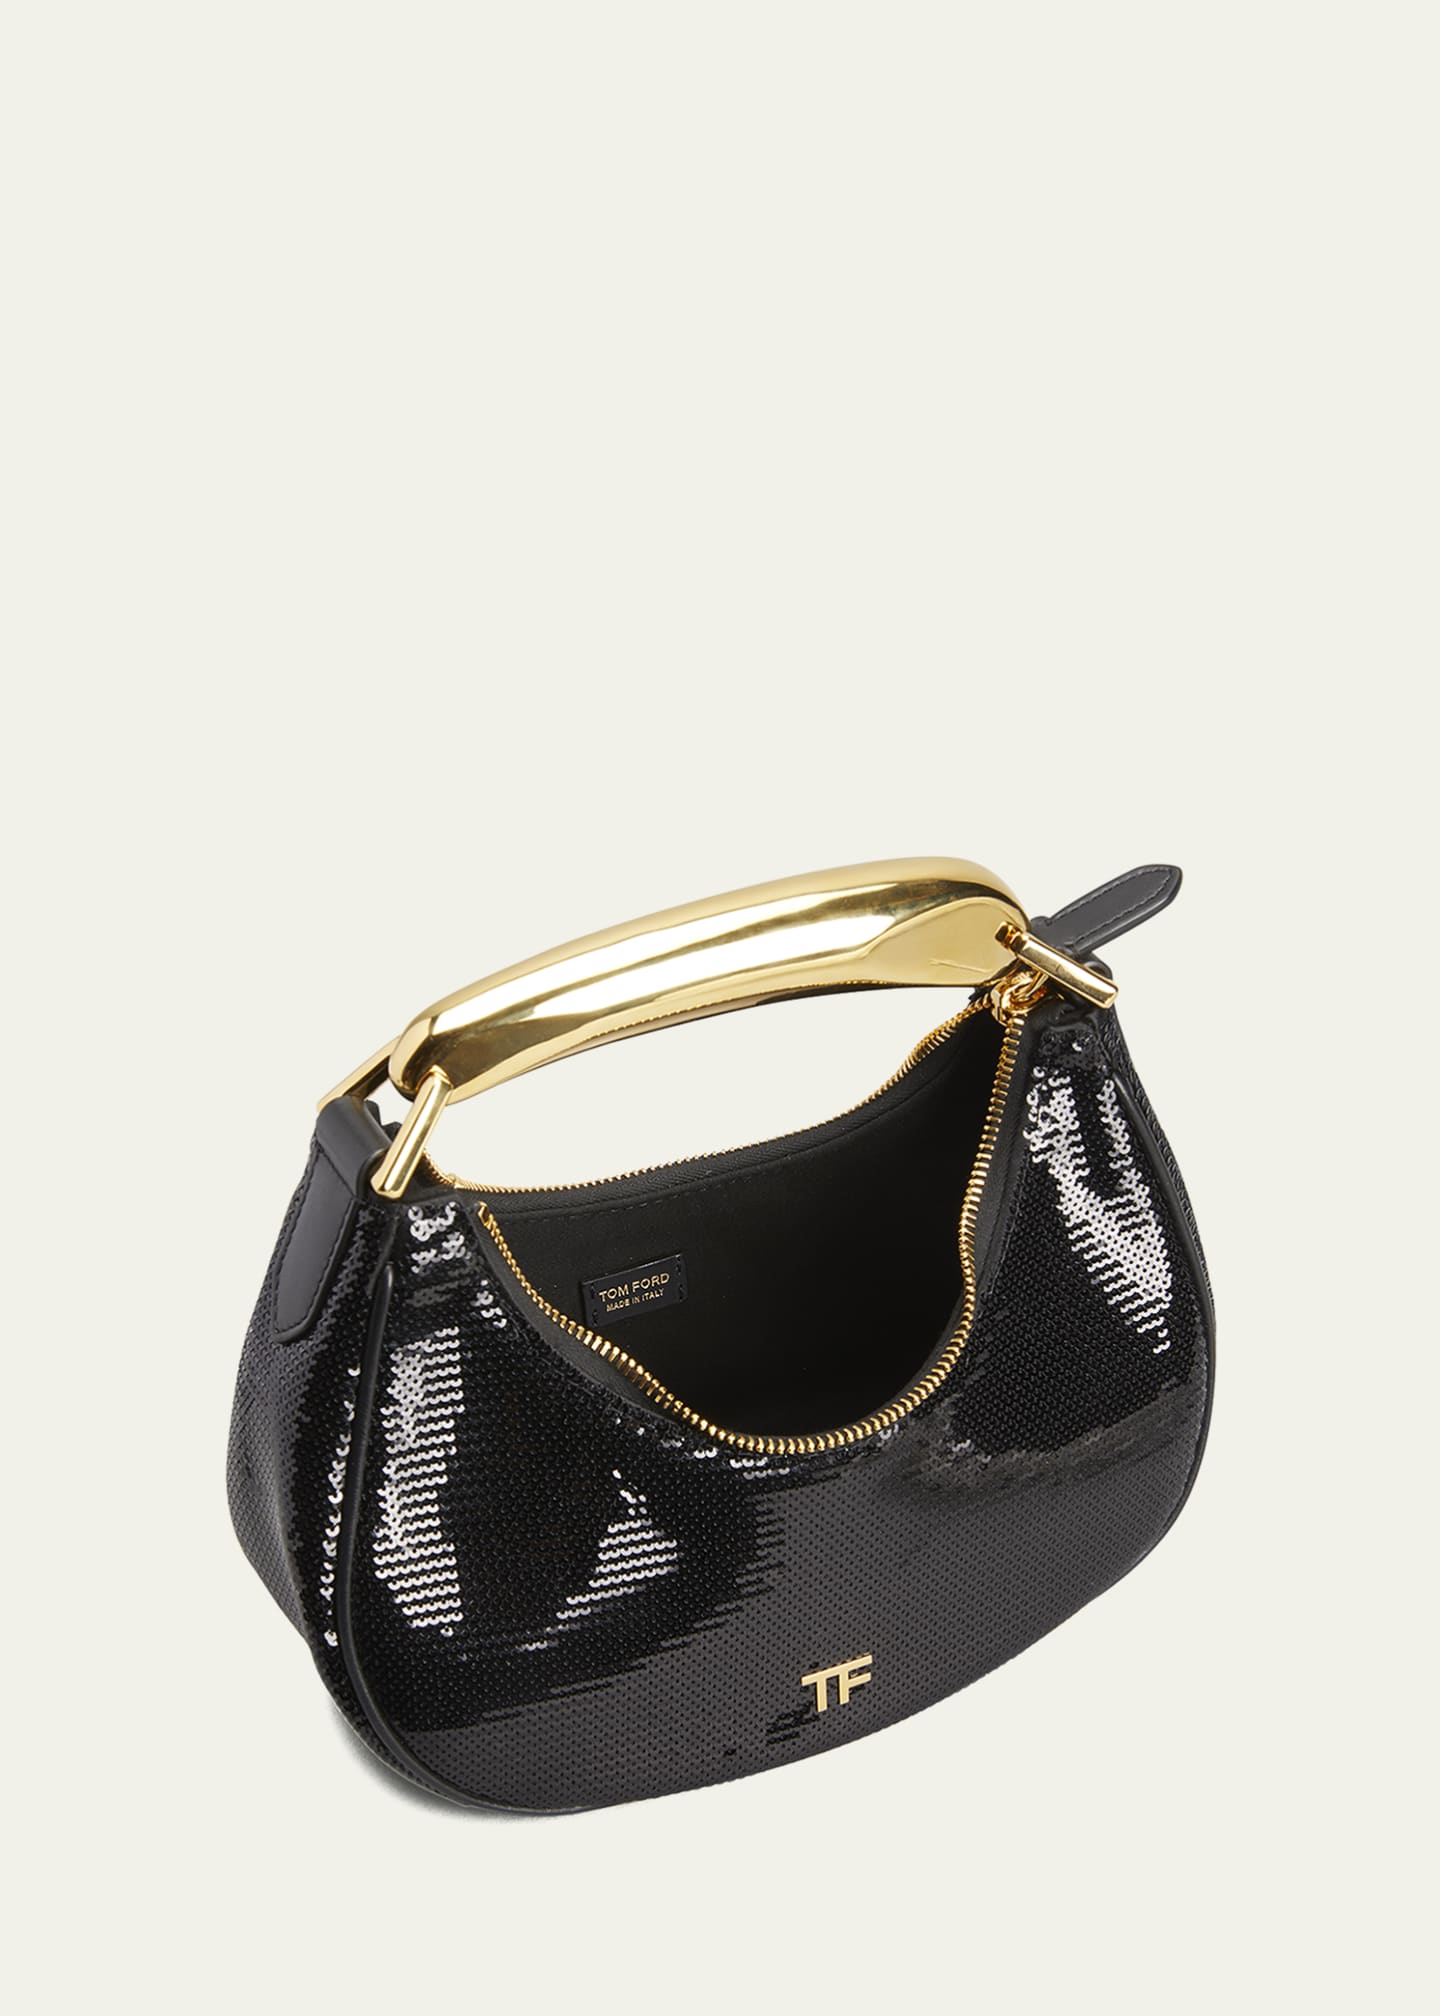 Tom Ford, Bags, Tom Ford Black Pouch